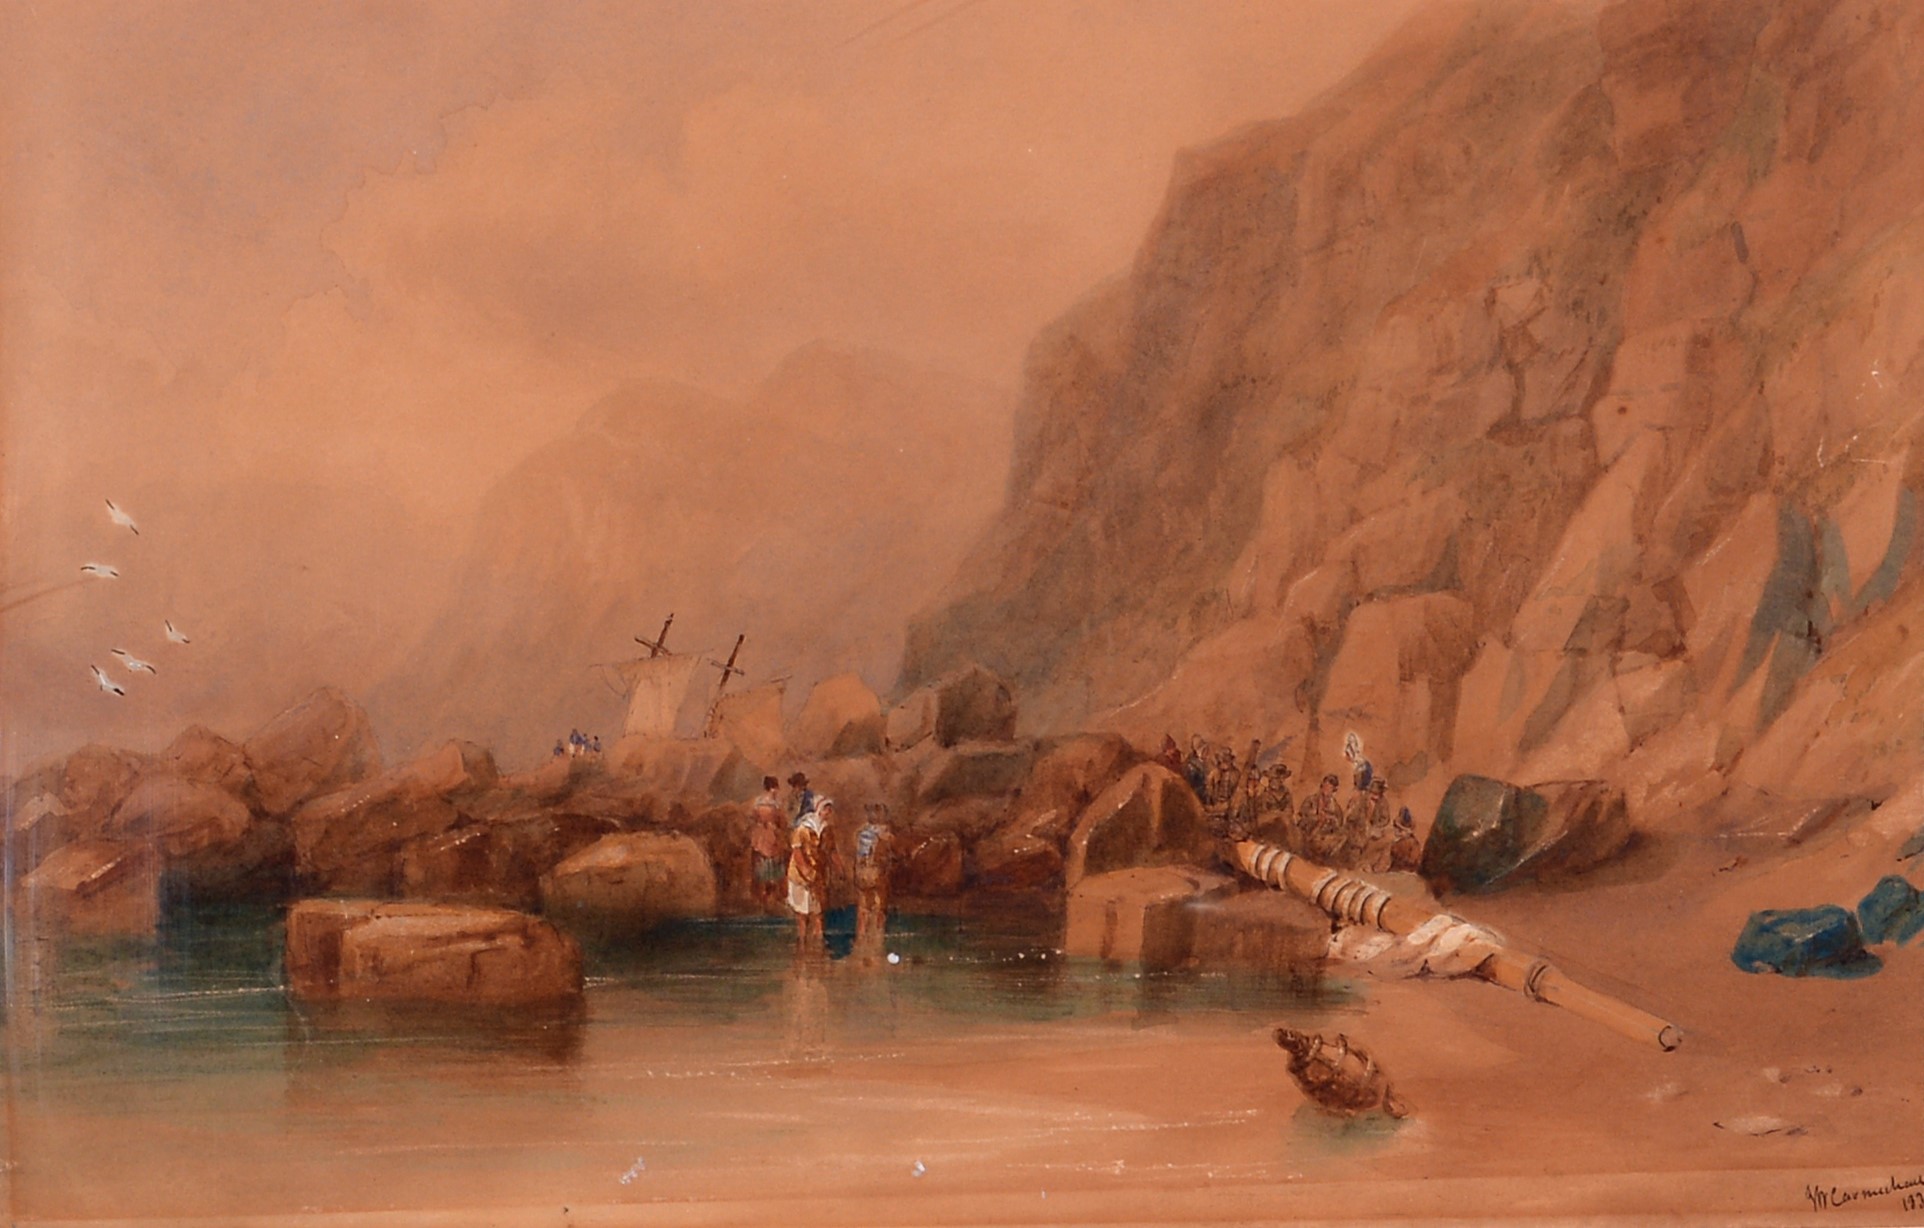 Figures salvaging wreckage on a beach